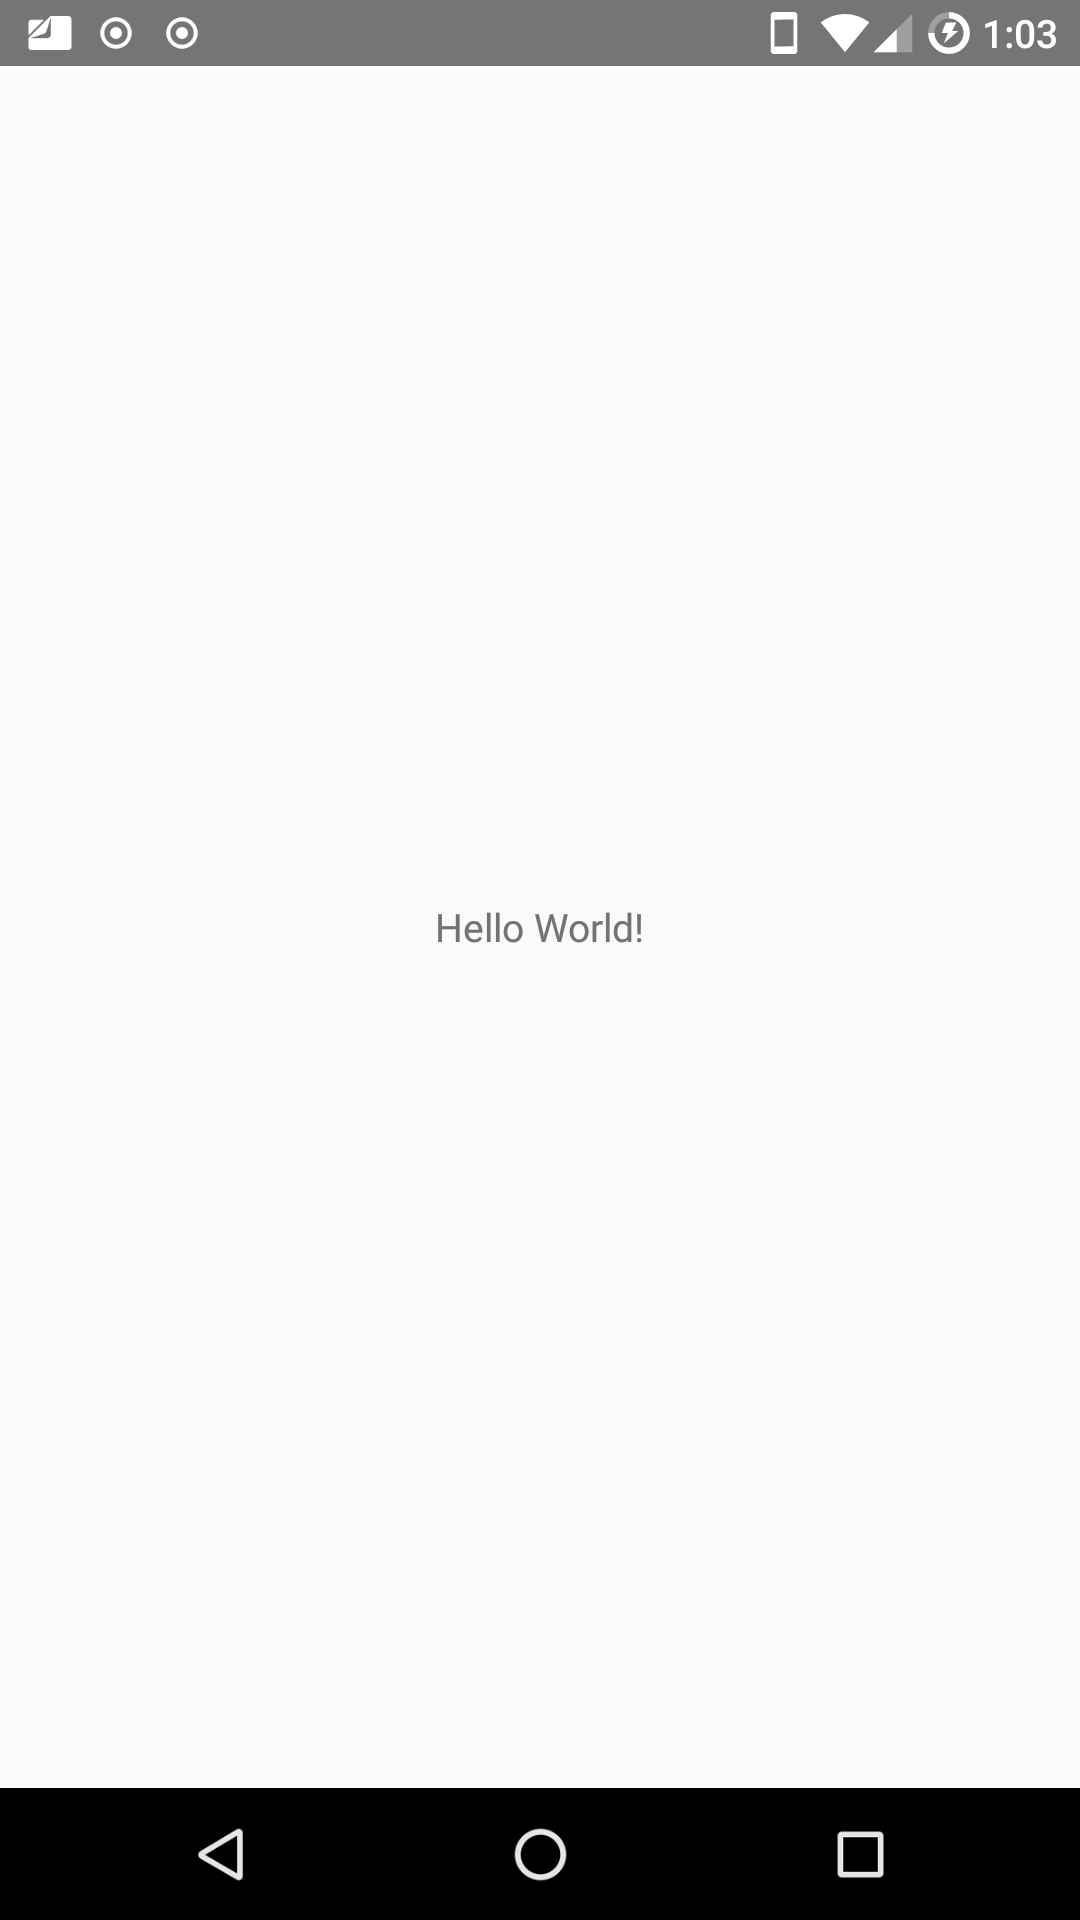 Hello world Android screen